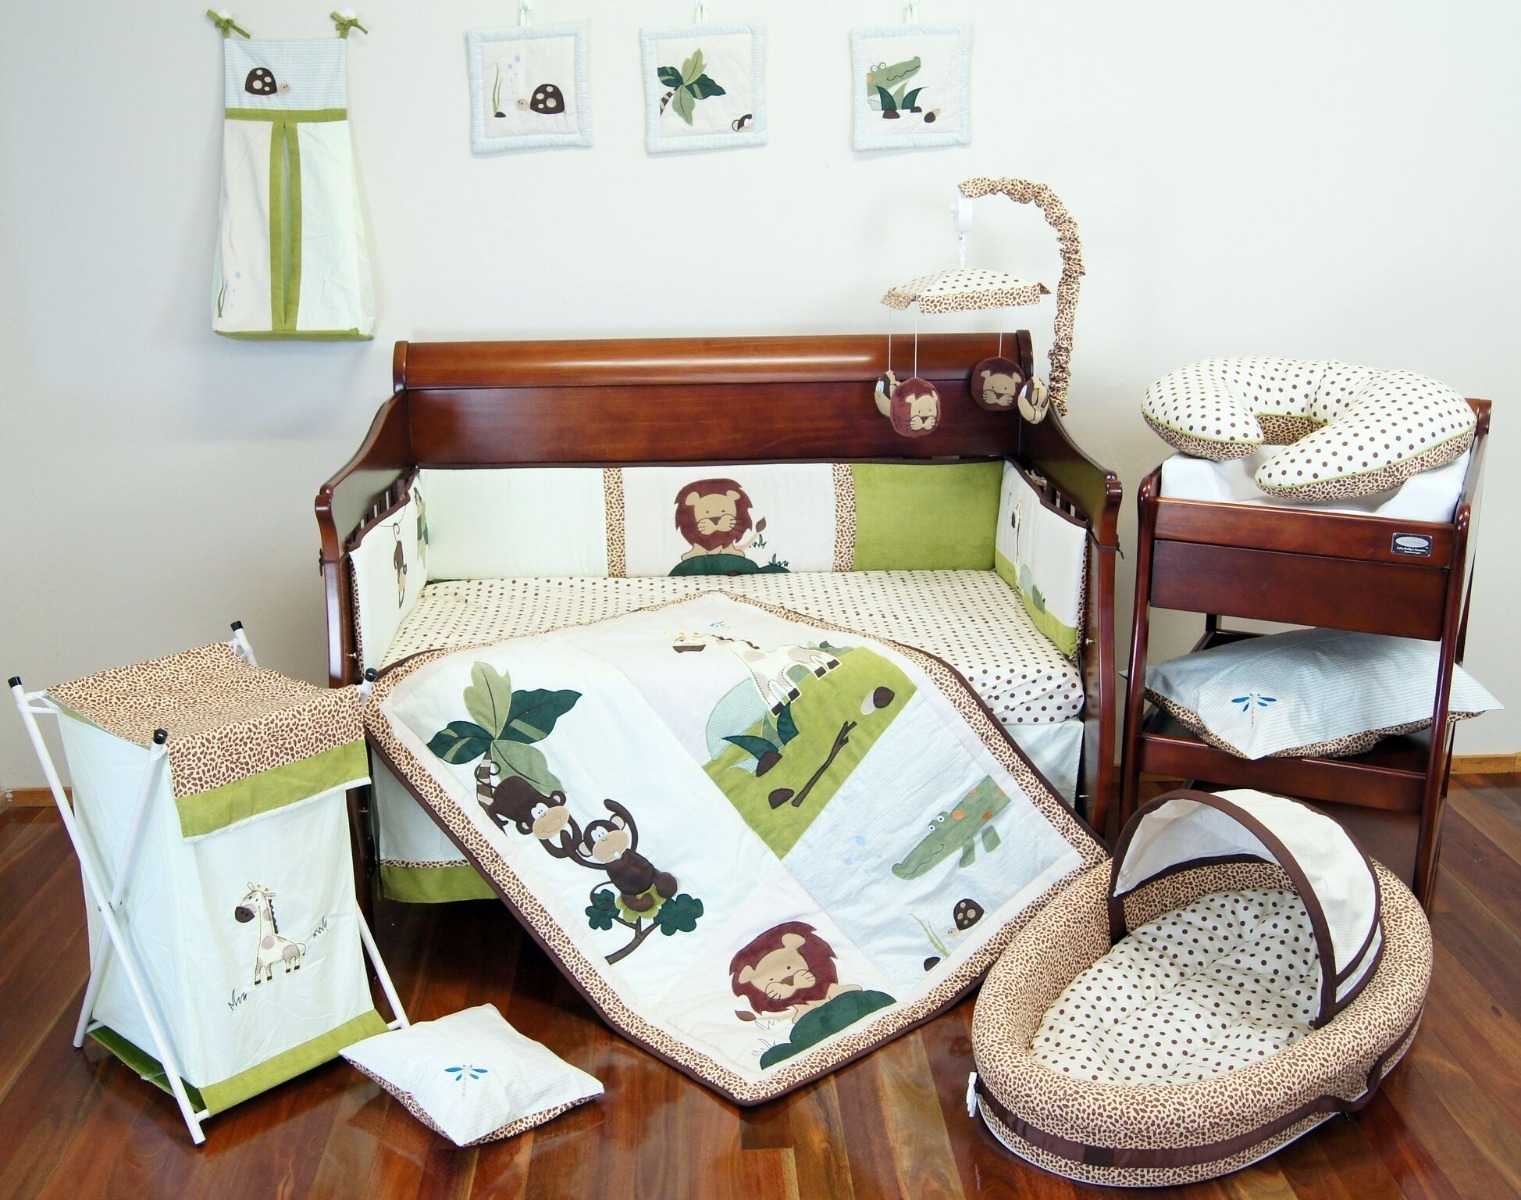 Where to Buy Nursery Furniture Online in Australia | Stay At Home Mum